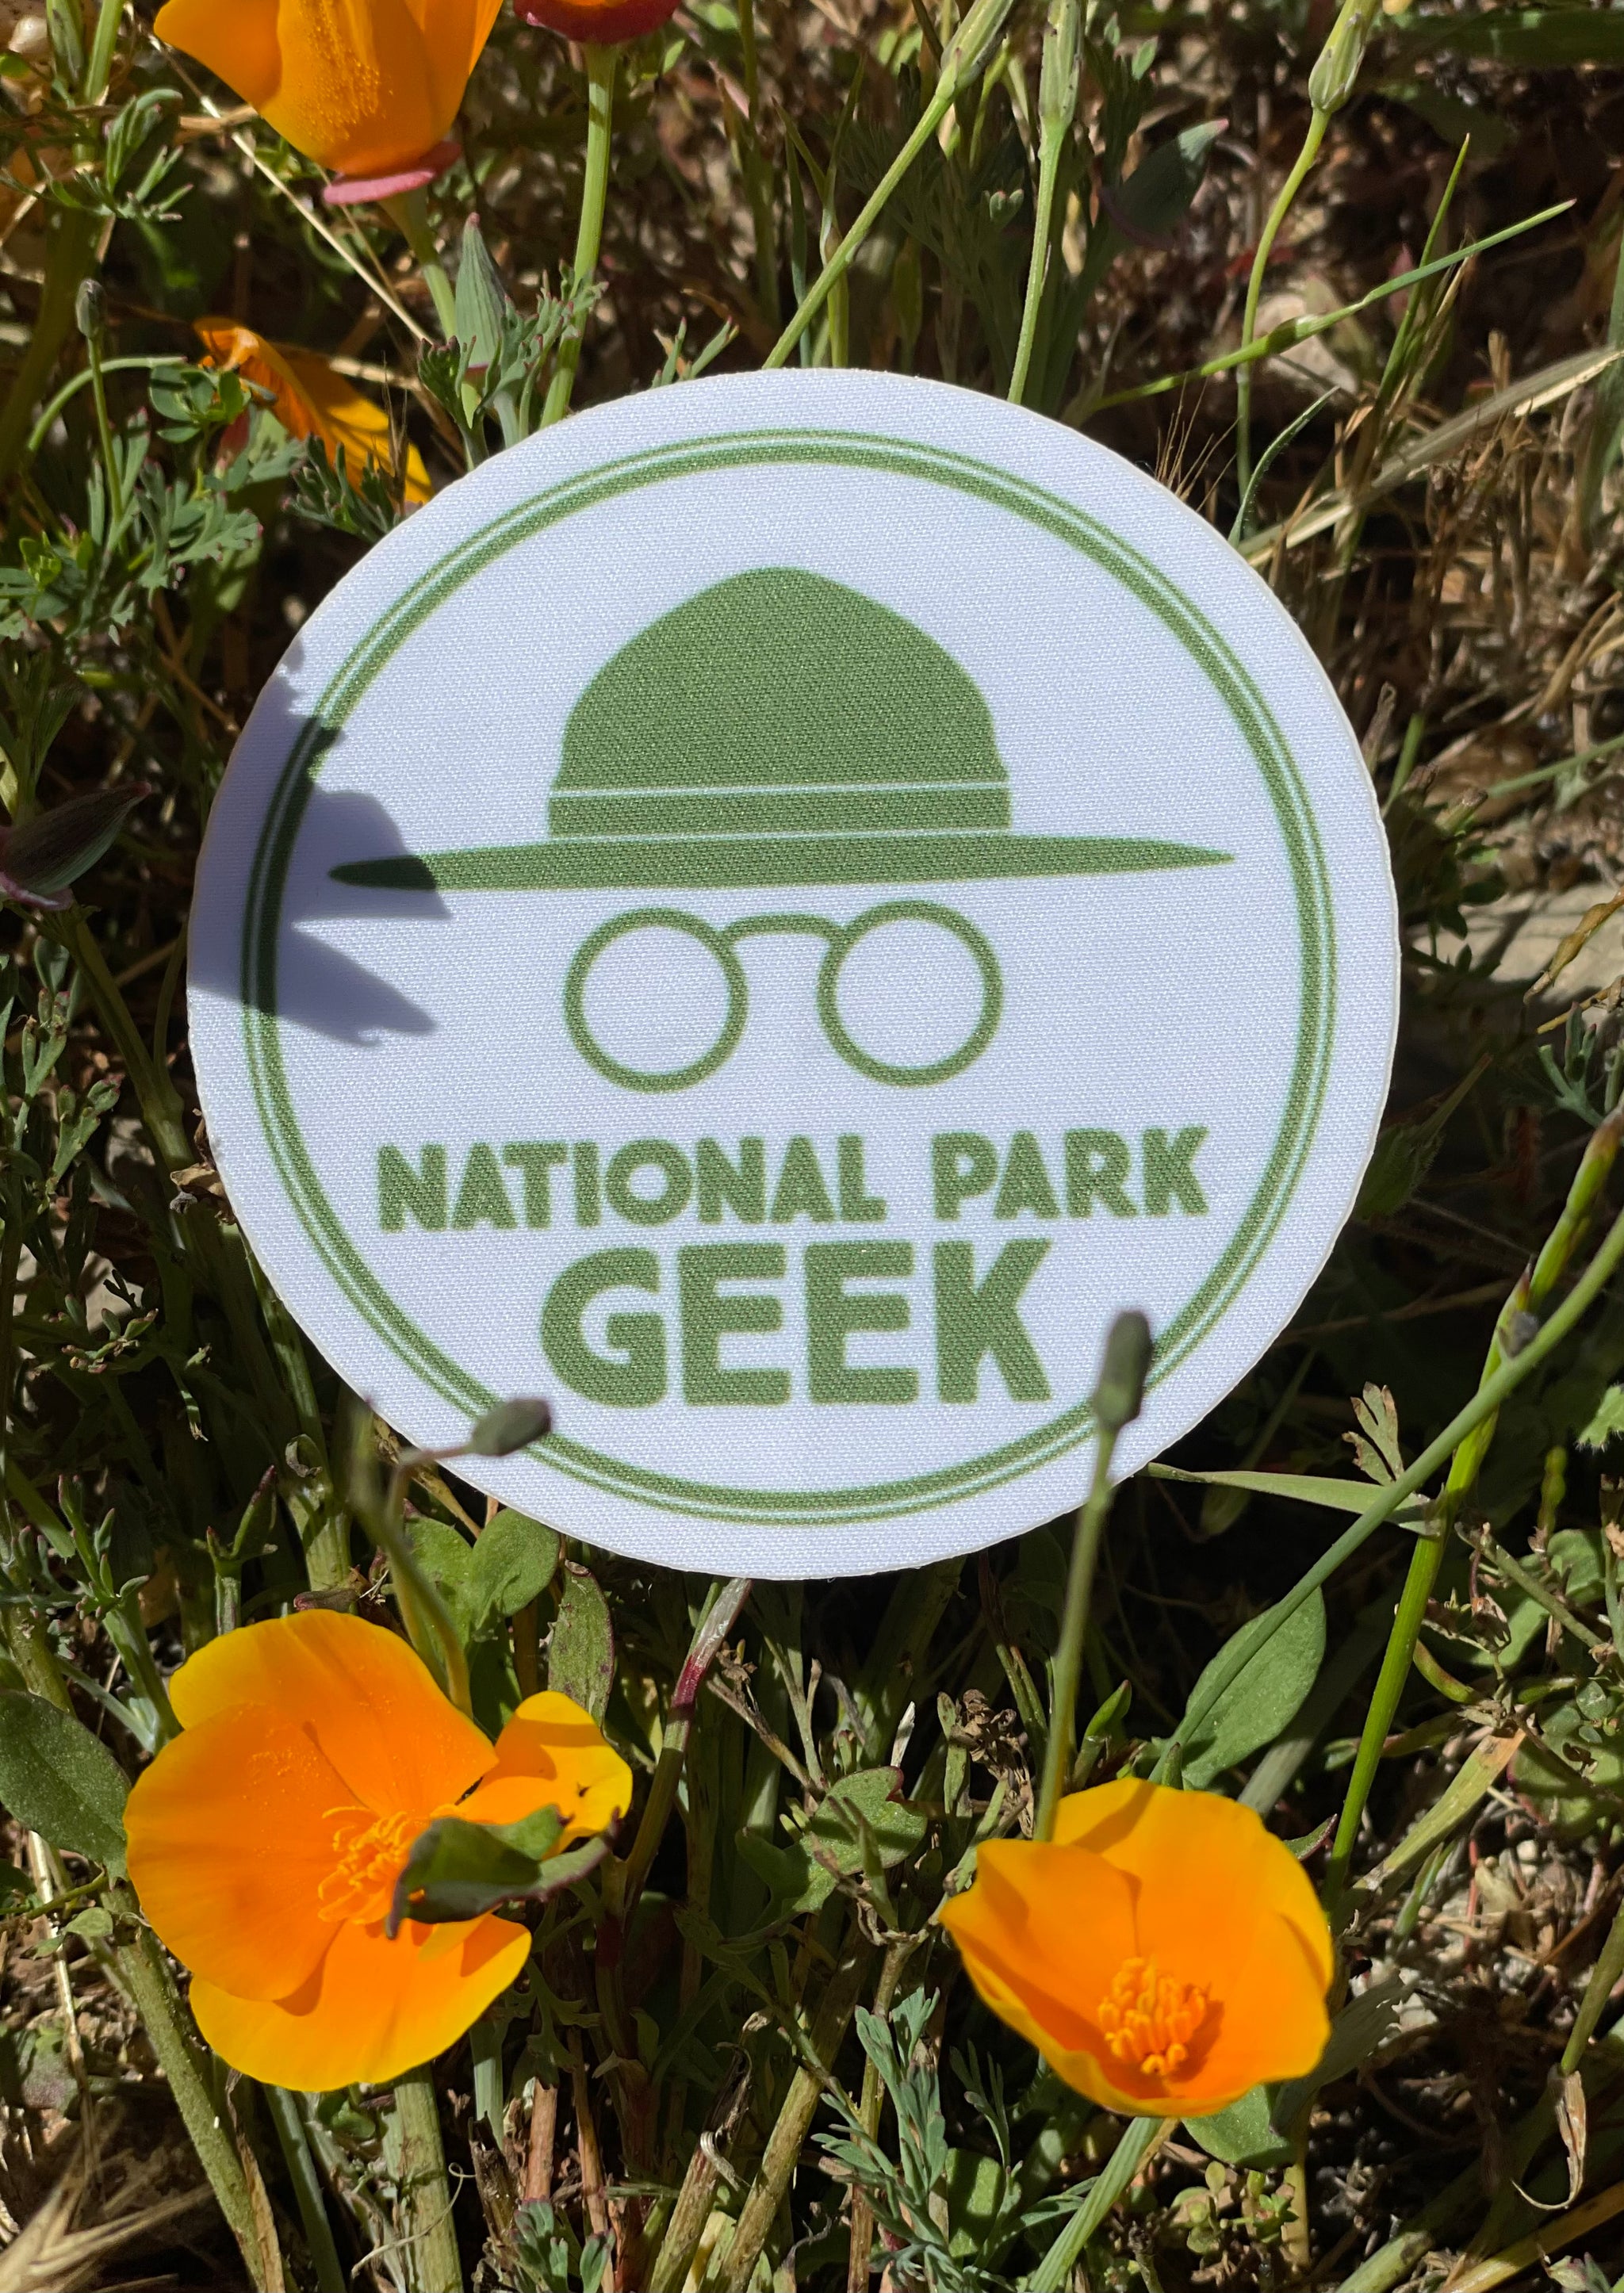 Combo Pack by NOSO - National Park Geek Gear Repair Patch - green & wh